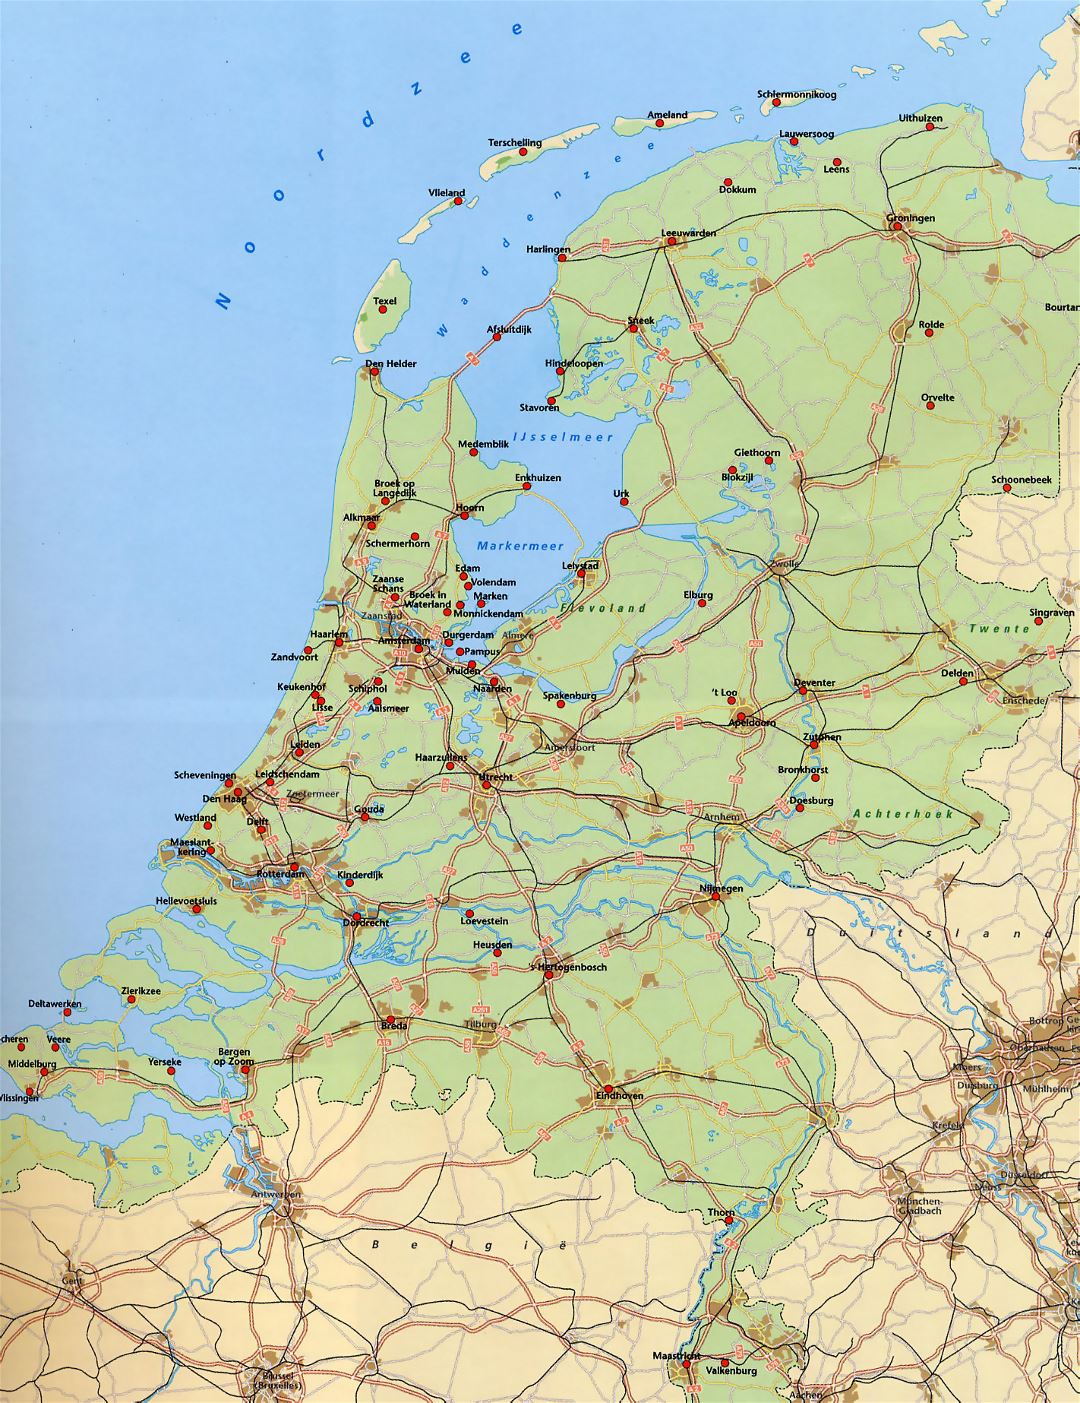 Large map of Netherlands with roads, railroads and major cities